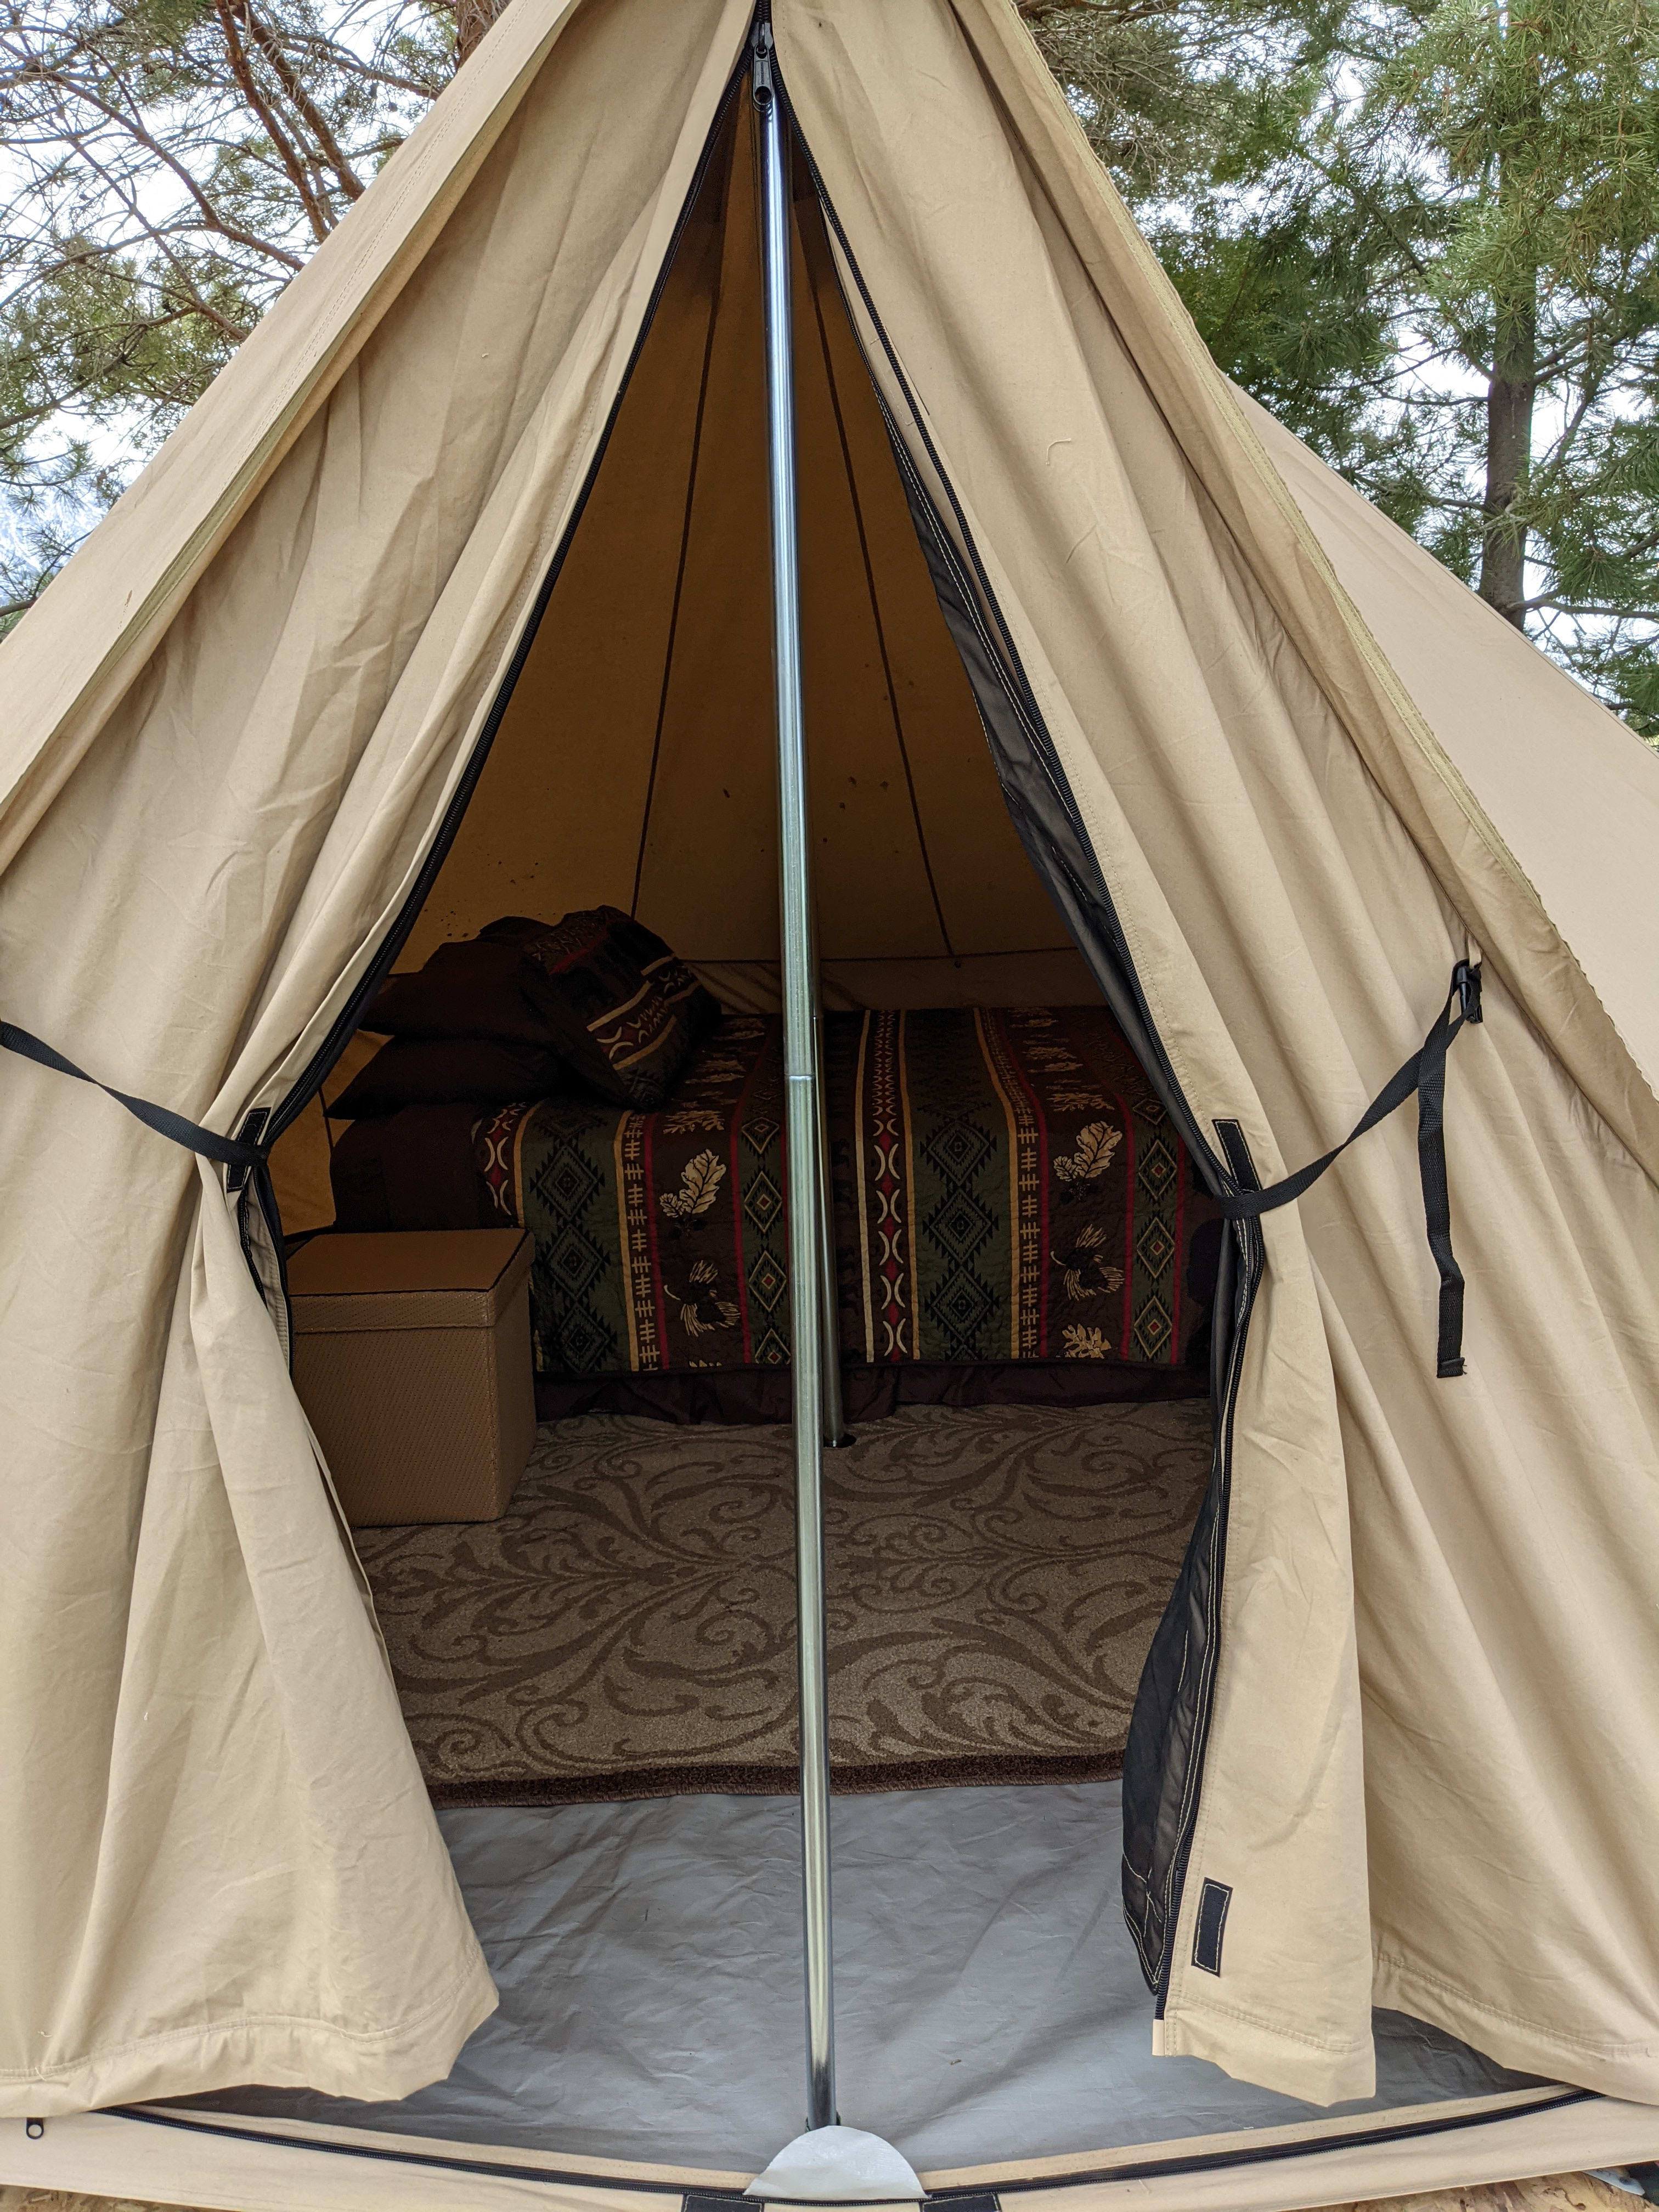 Magical Bell Tent hidden in the cove of trees. Queen bed with deluxe linens